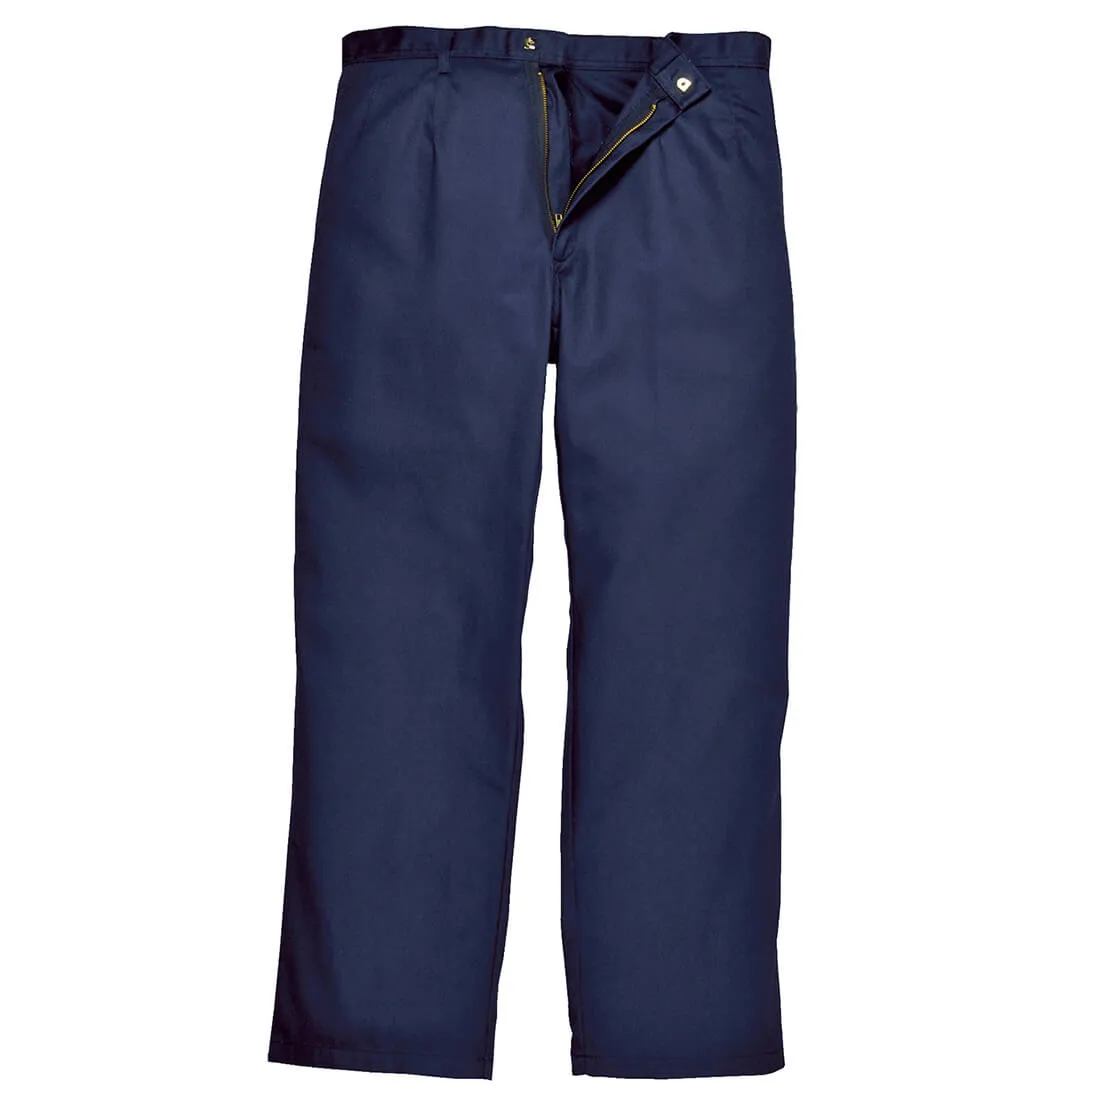 Biz Weld Mens Flame Resistant Trousers - Navy Blue, Extra Small, 32"